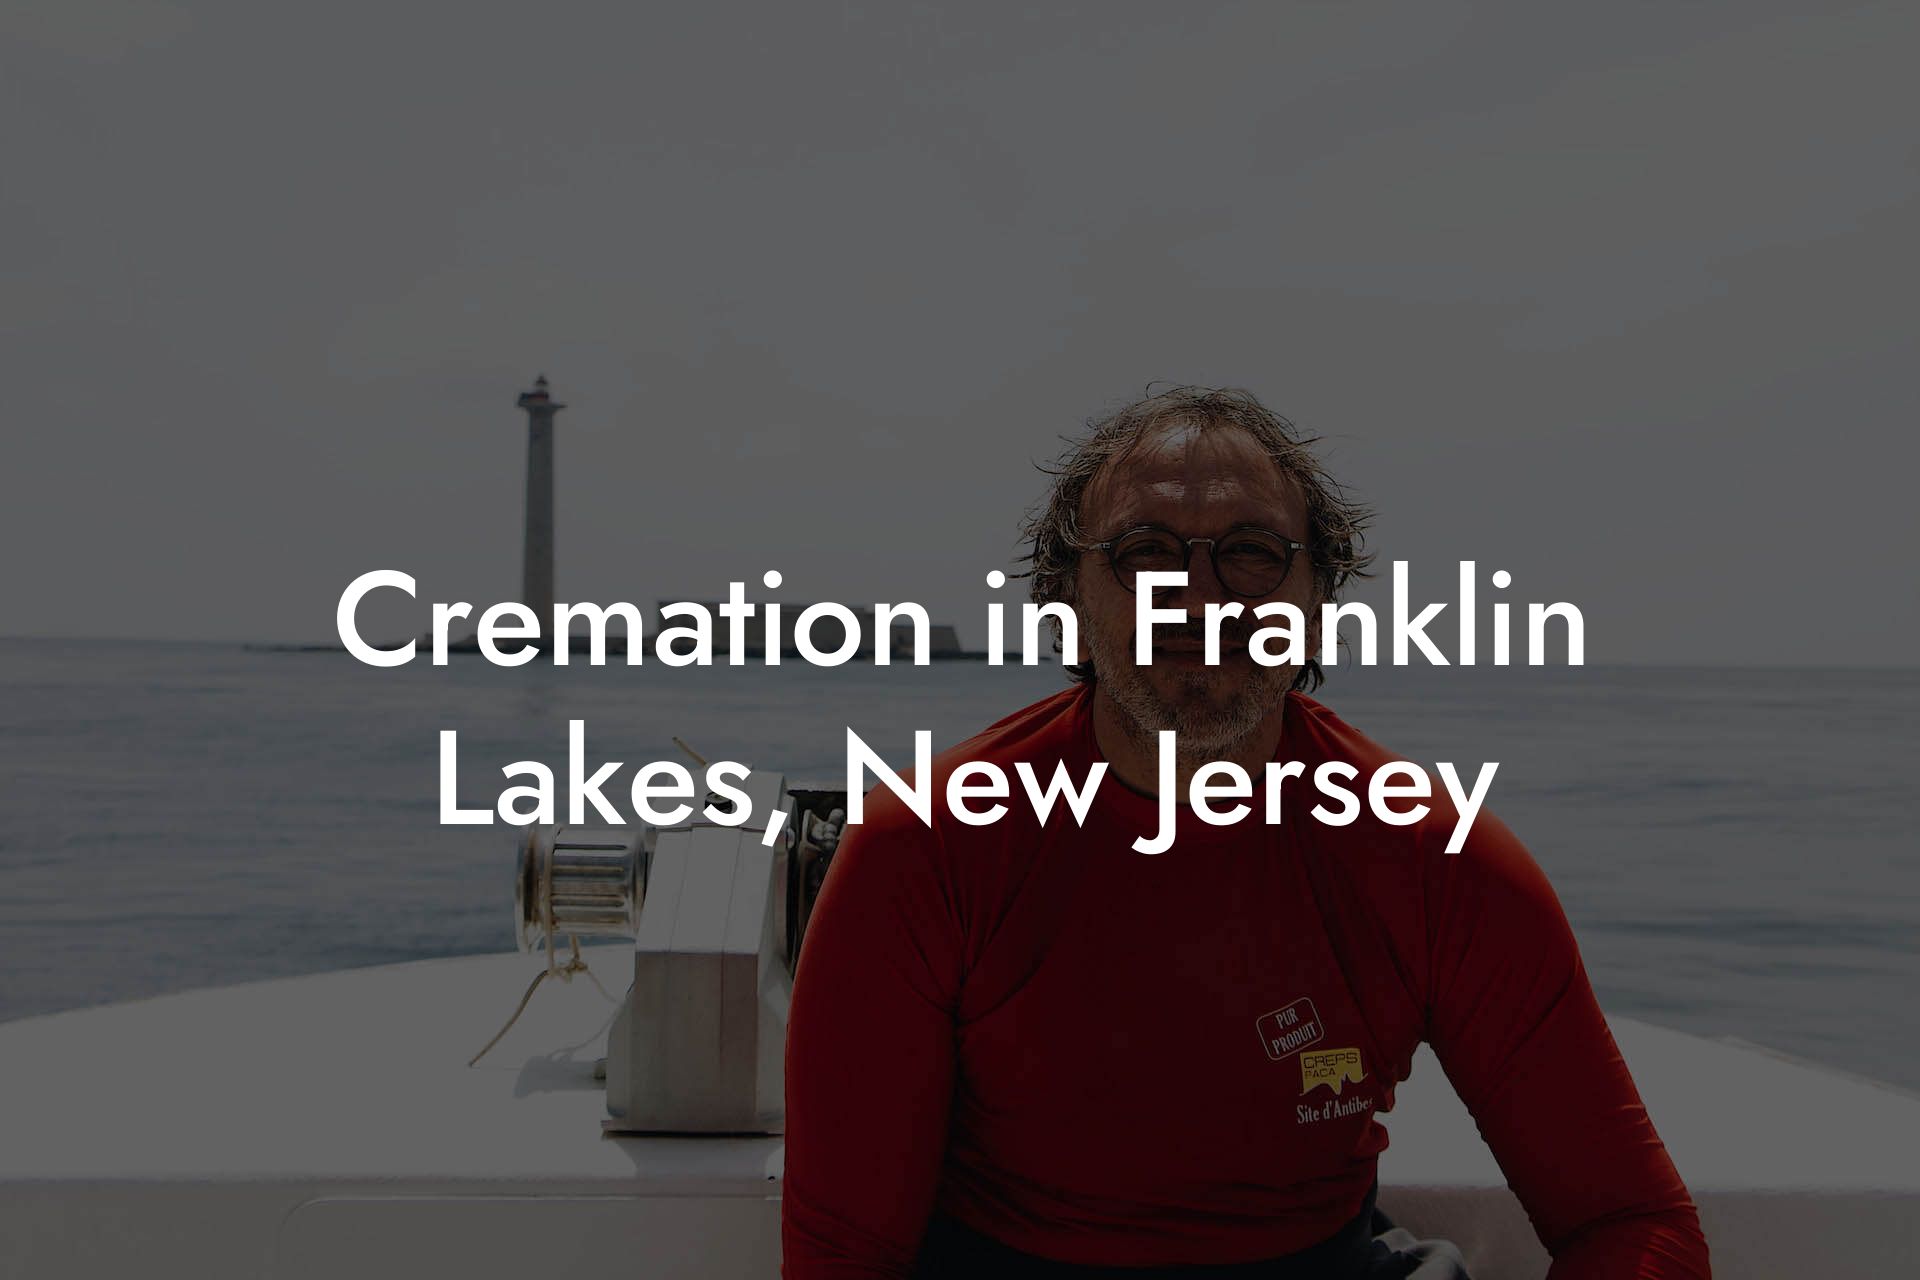 Cremation in Franklin Lakes, New Jersey